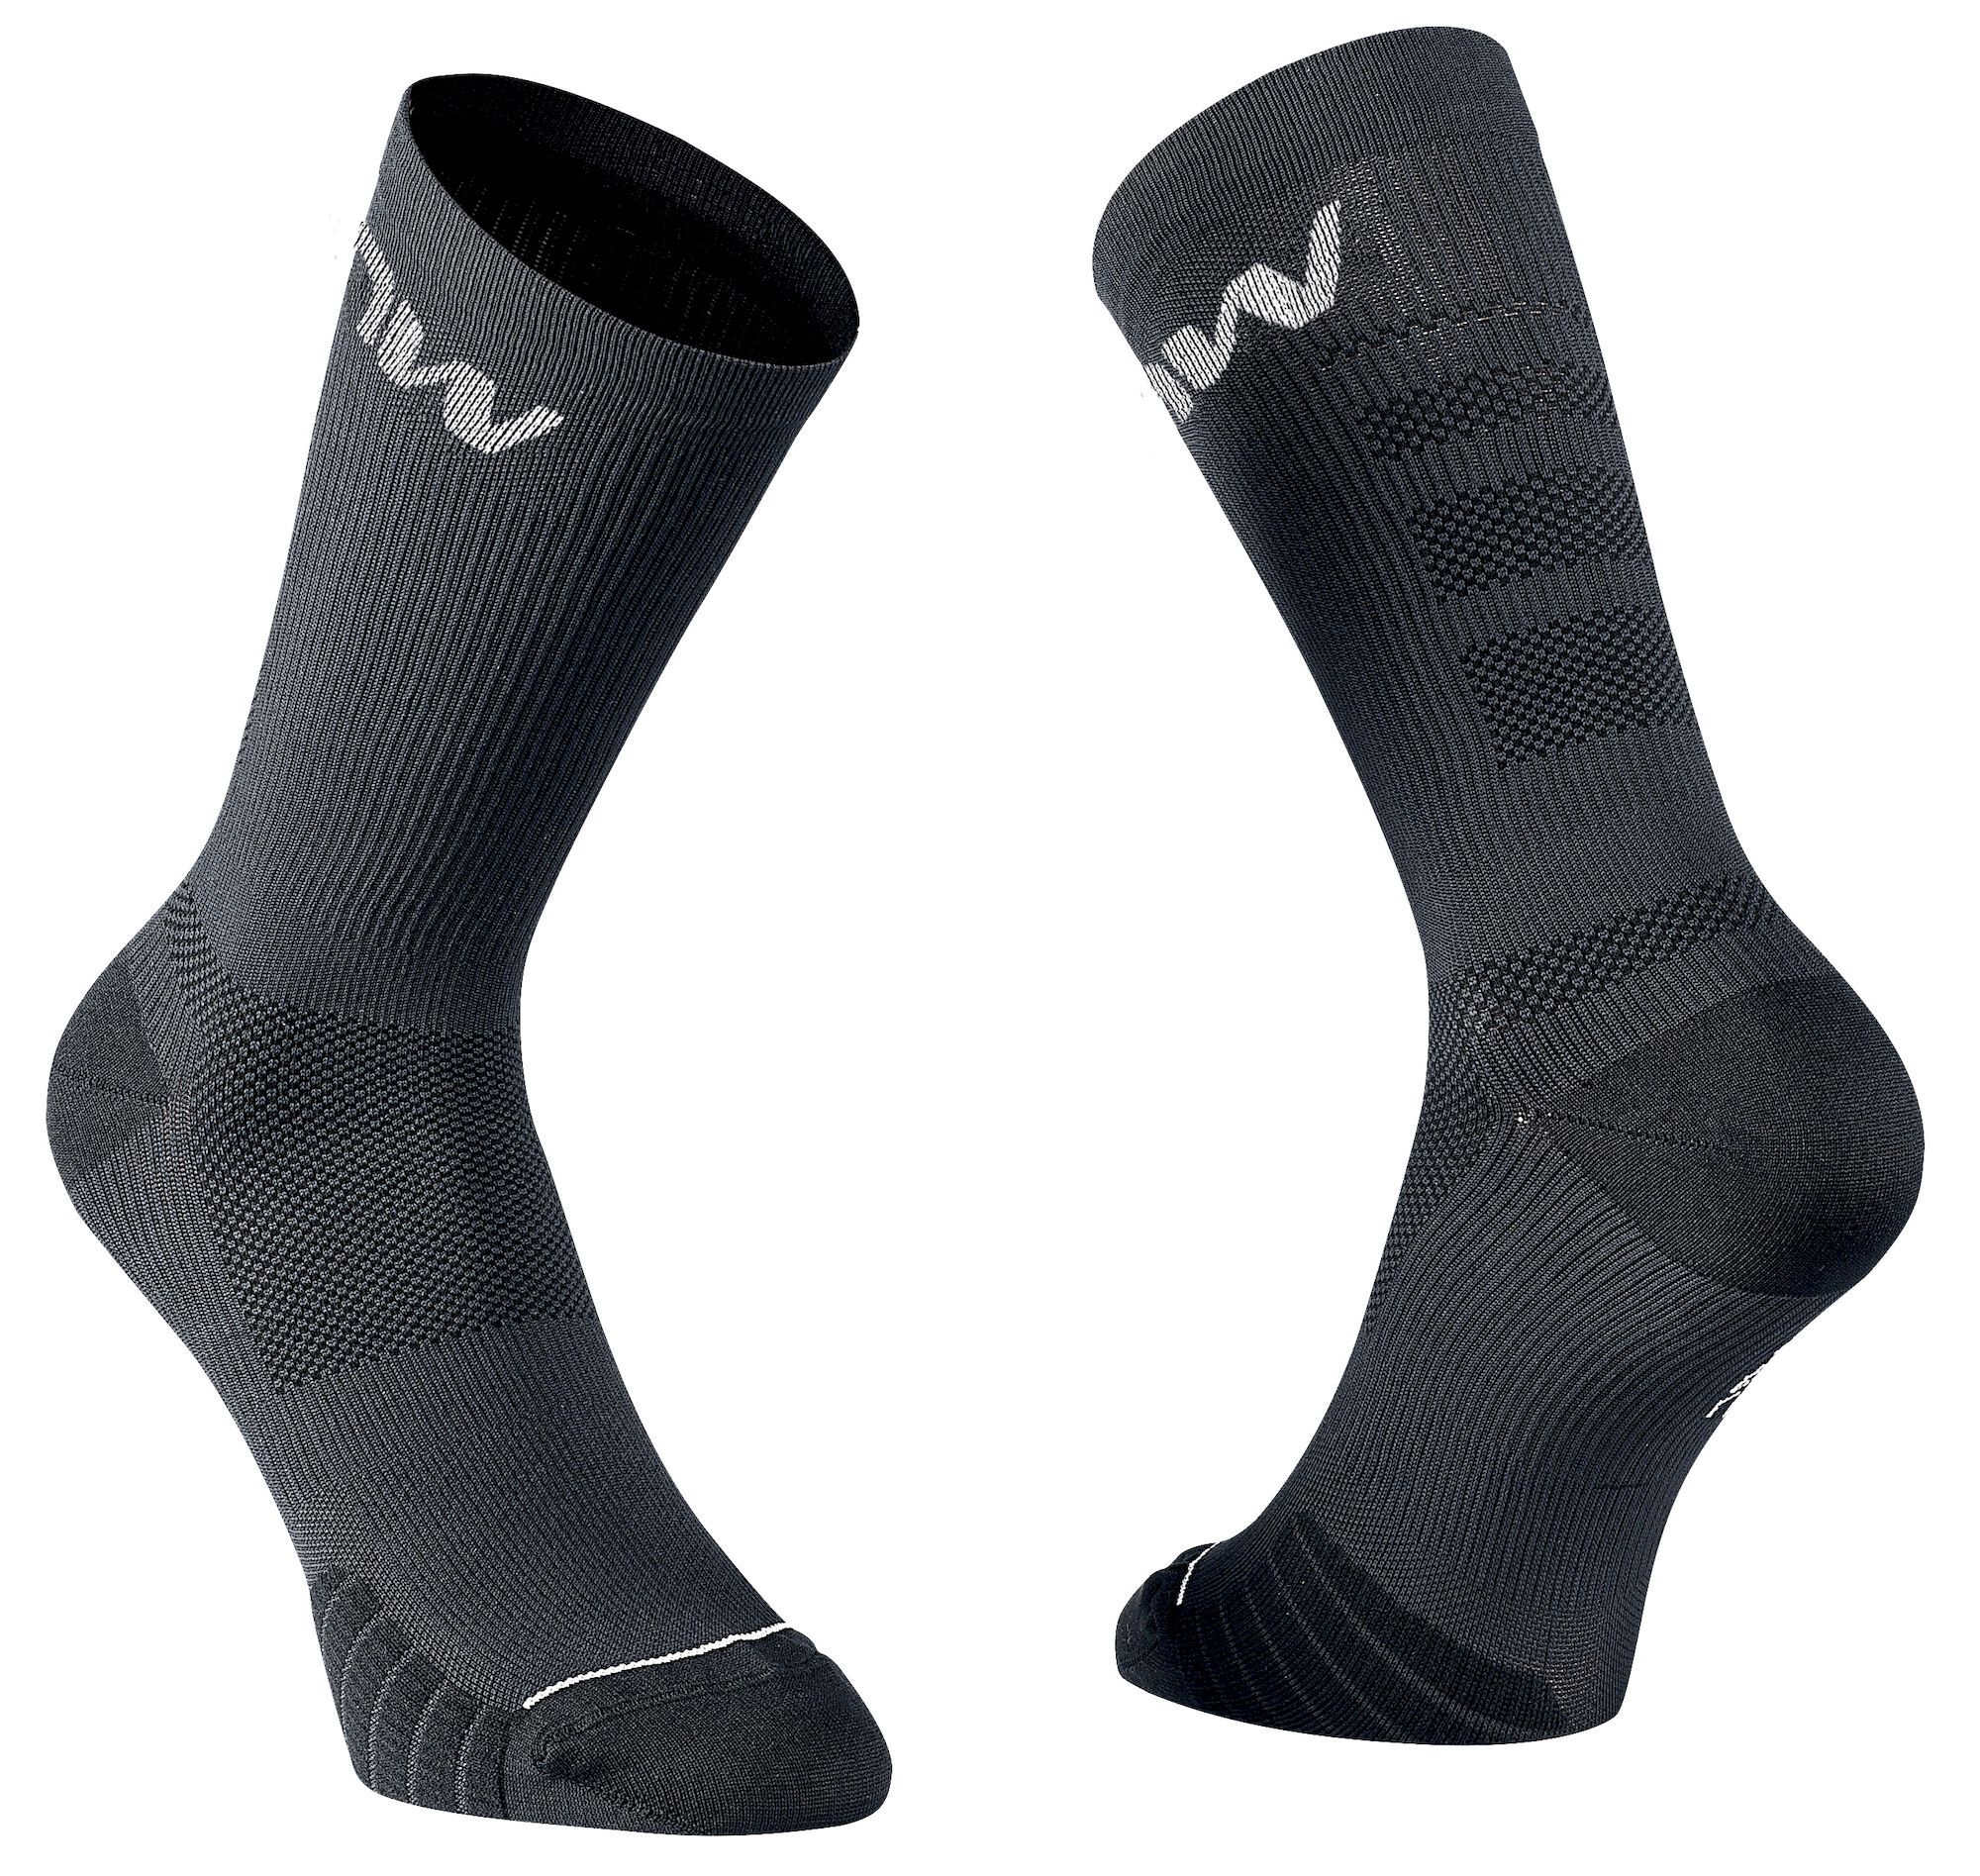 Northwave Extreme Pro Sock - Calcetines ciclismo - Hombre